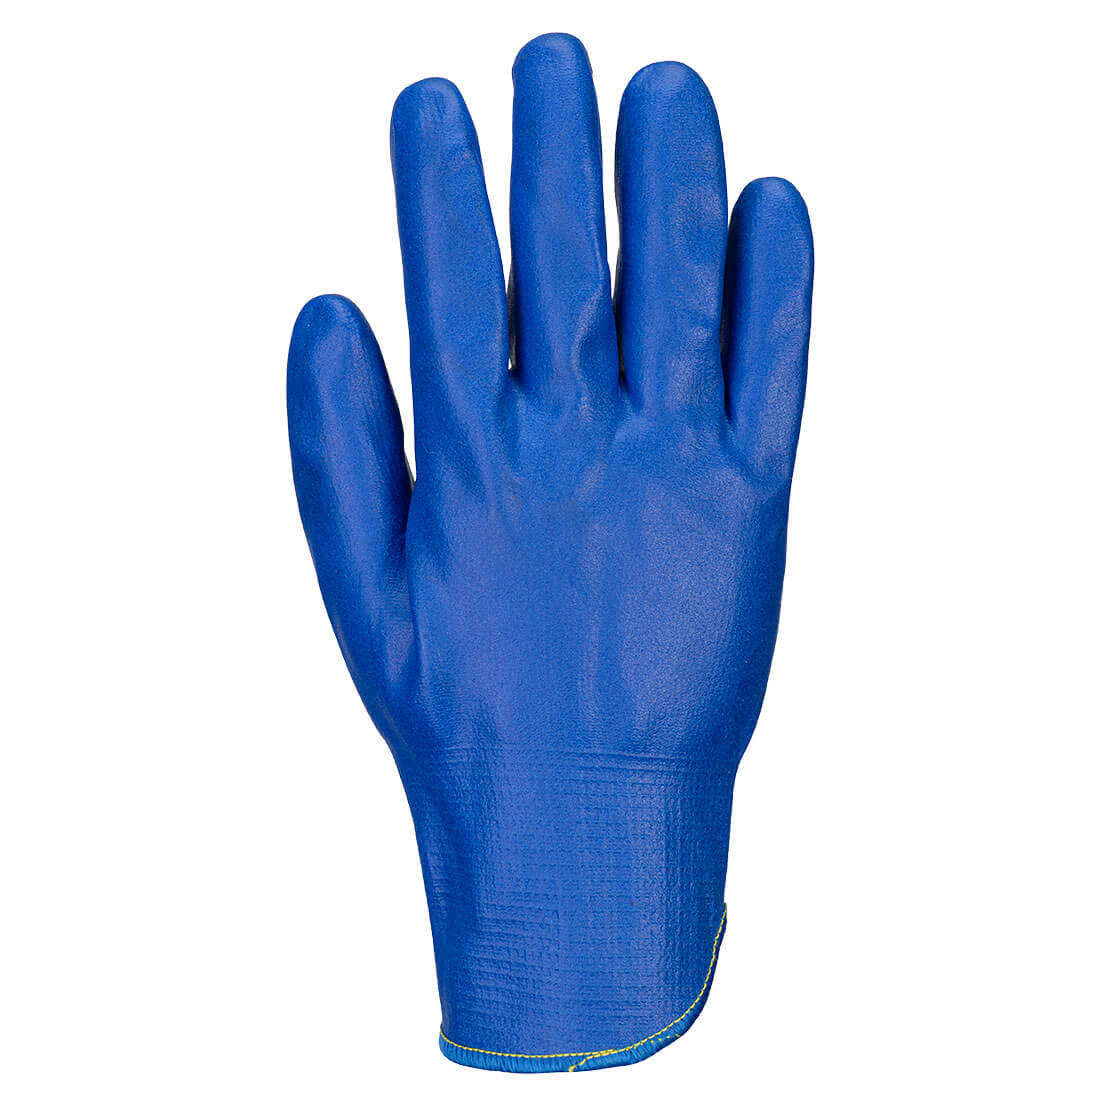 FD Grip 15 Nitrile Gauntlet - Personal protection